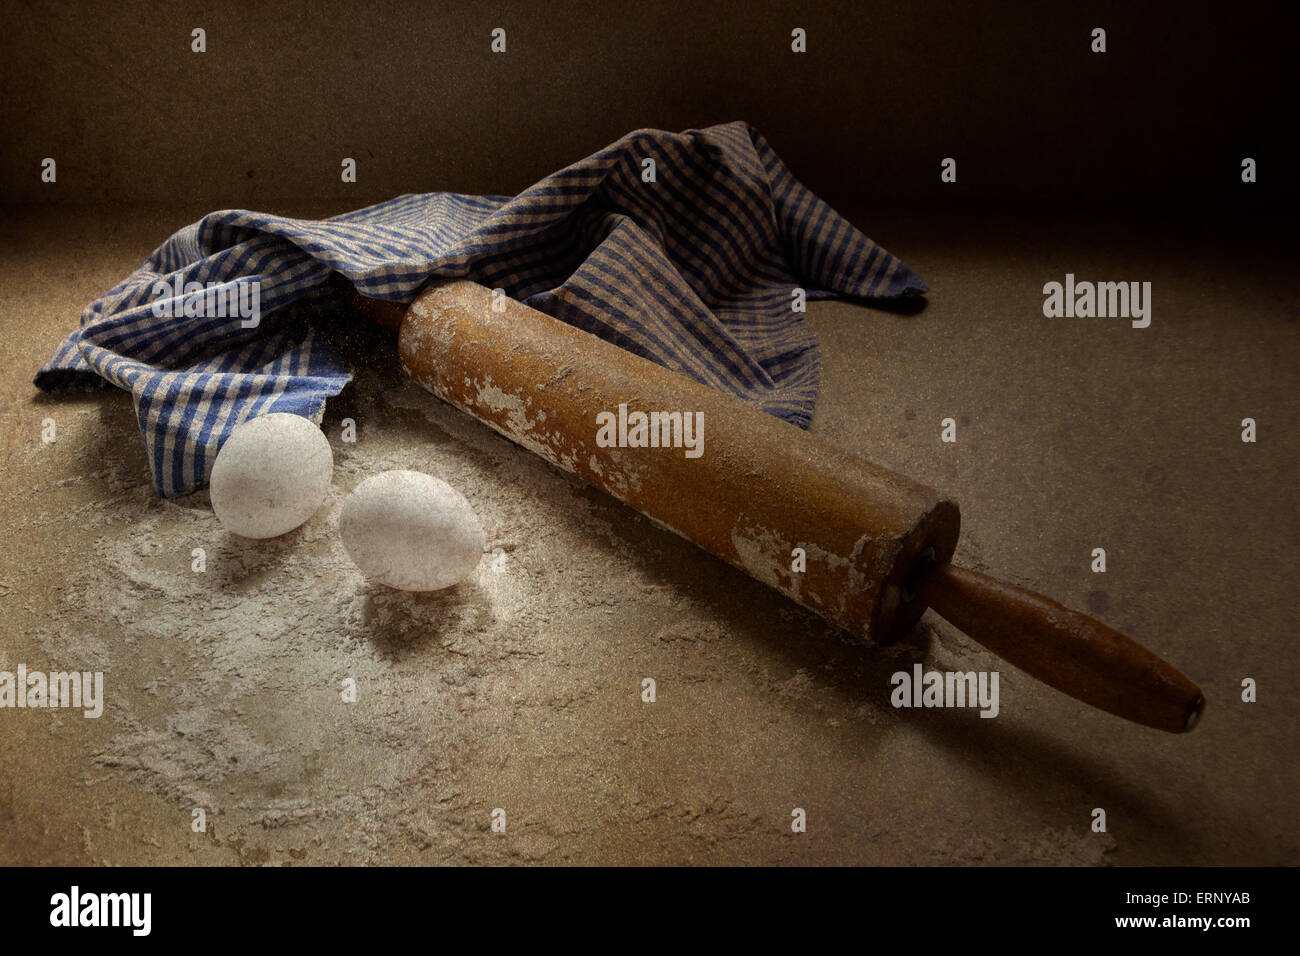 An antique rolling pin sits on a floured surface with two eggs and a checkered blue and white towel. Stock Photo